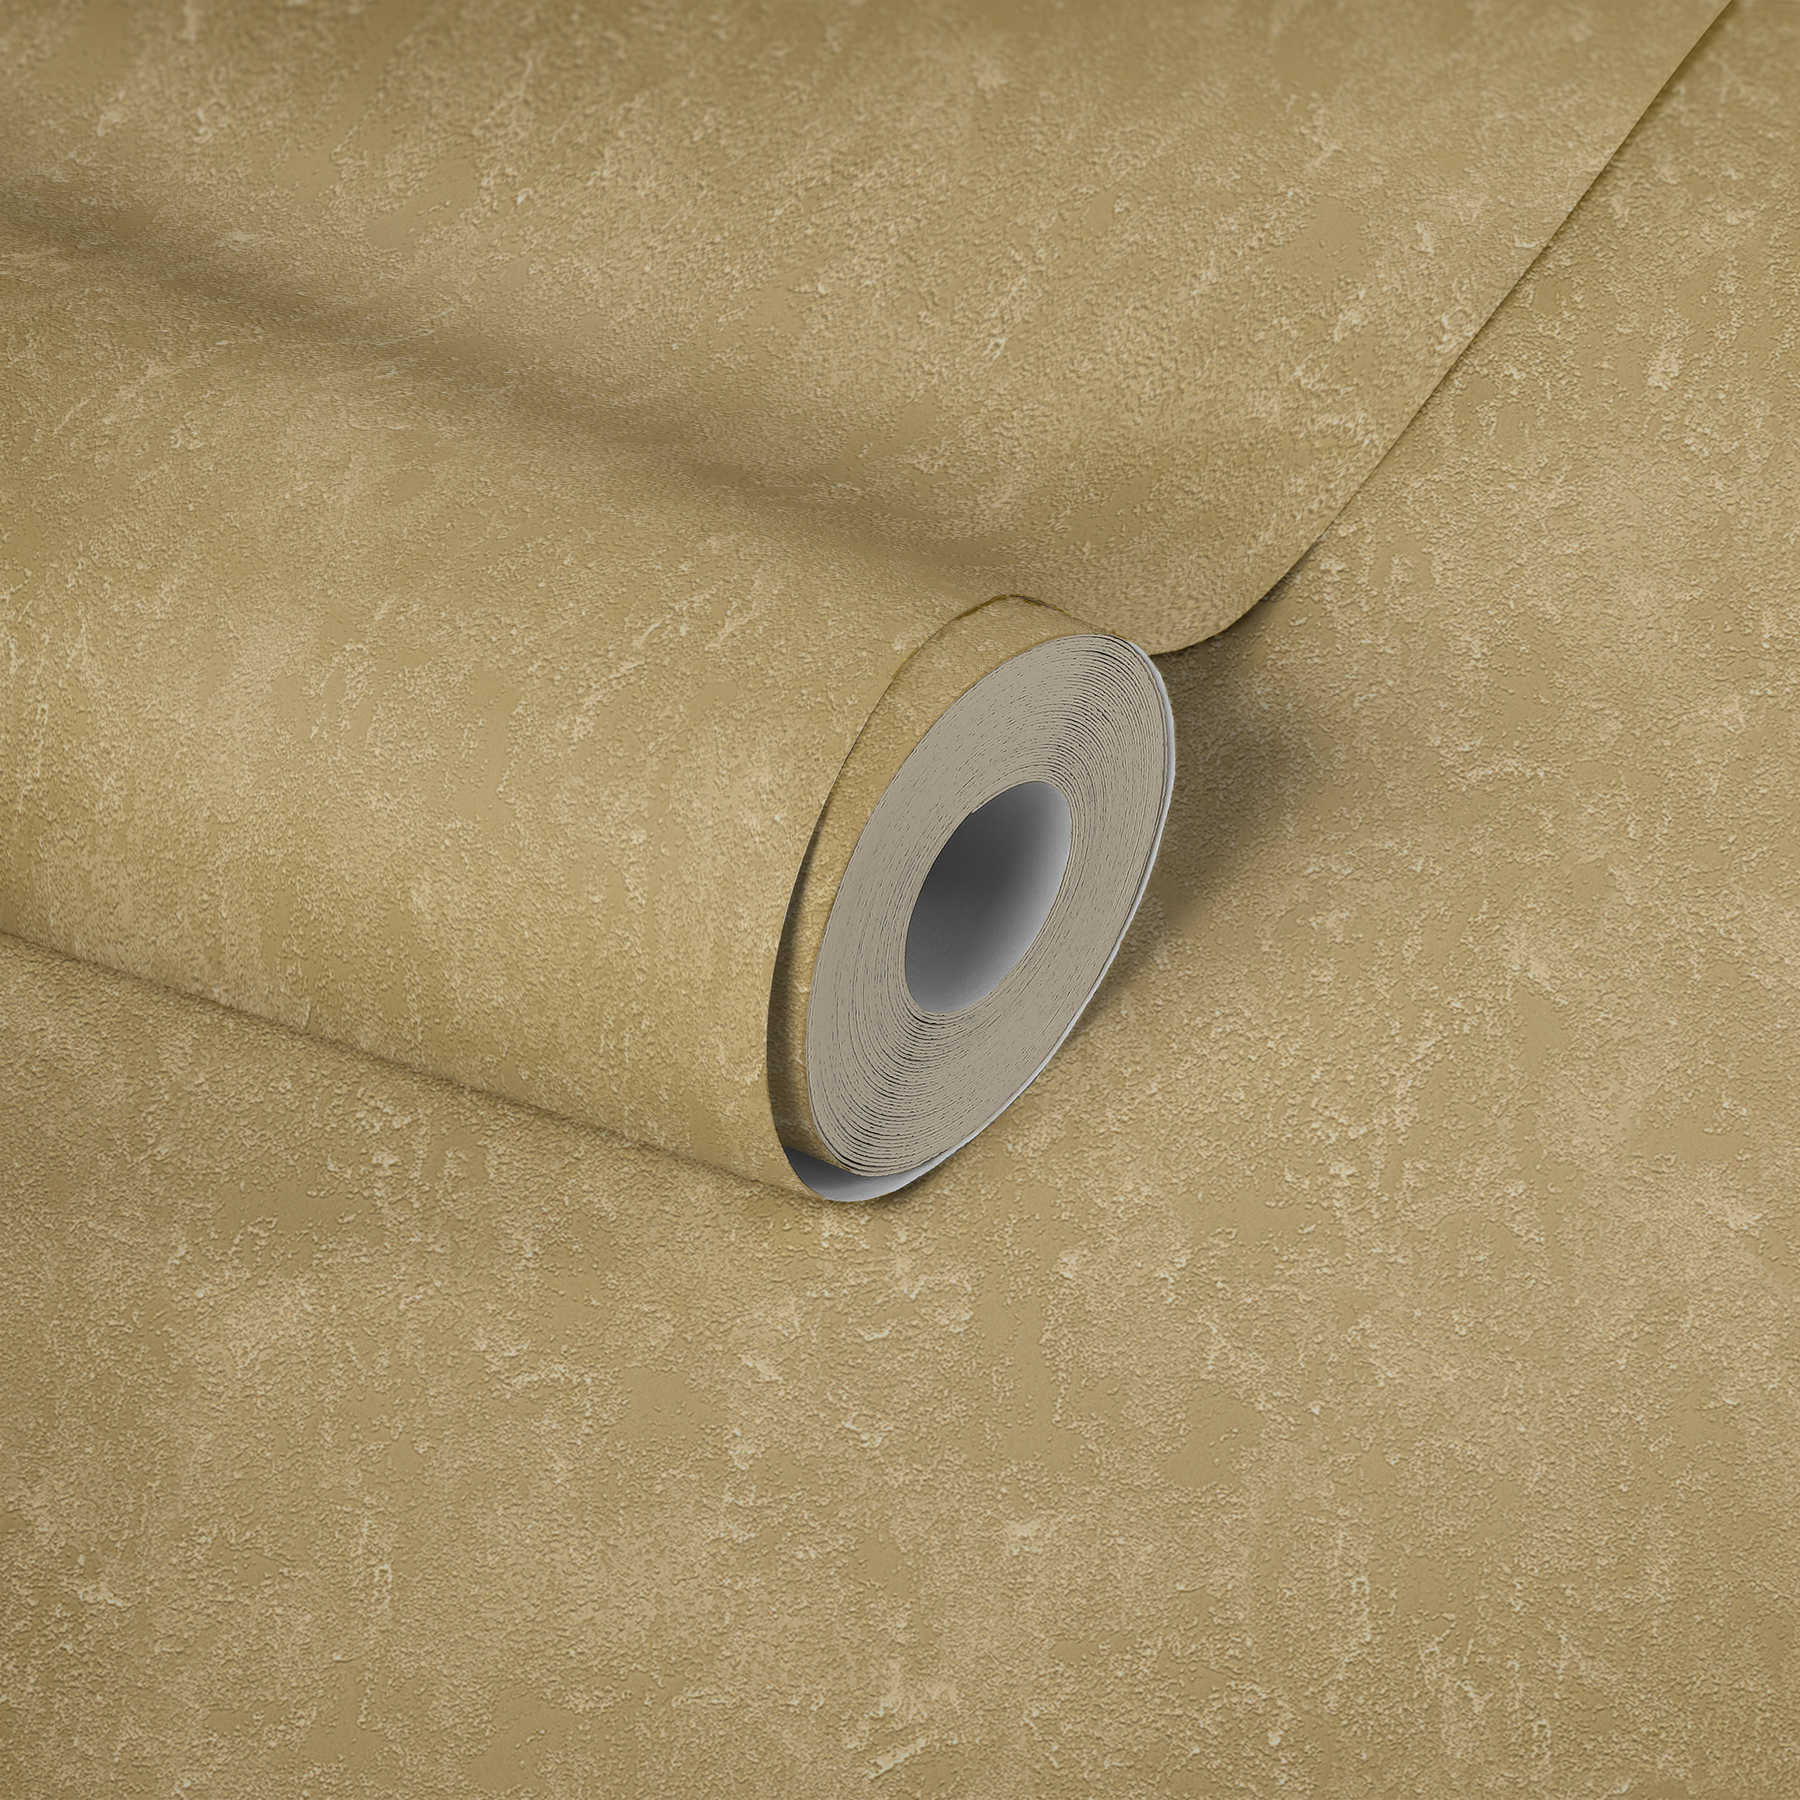             Wallpaper gold plain with metallic luster & embossed texture
        